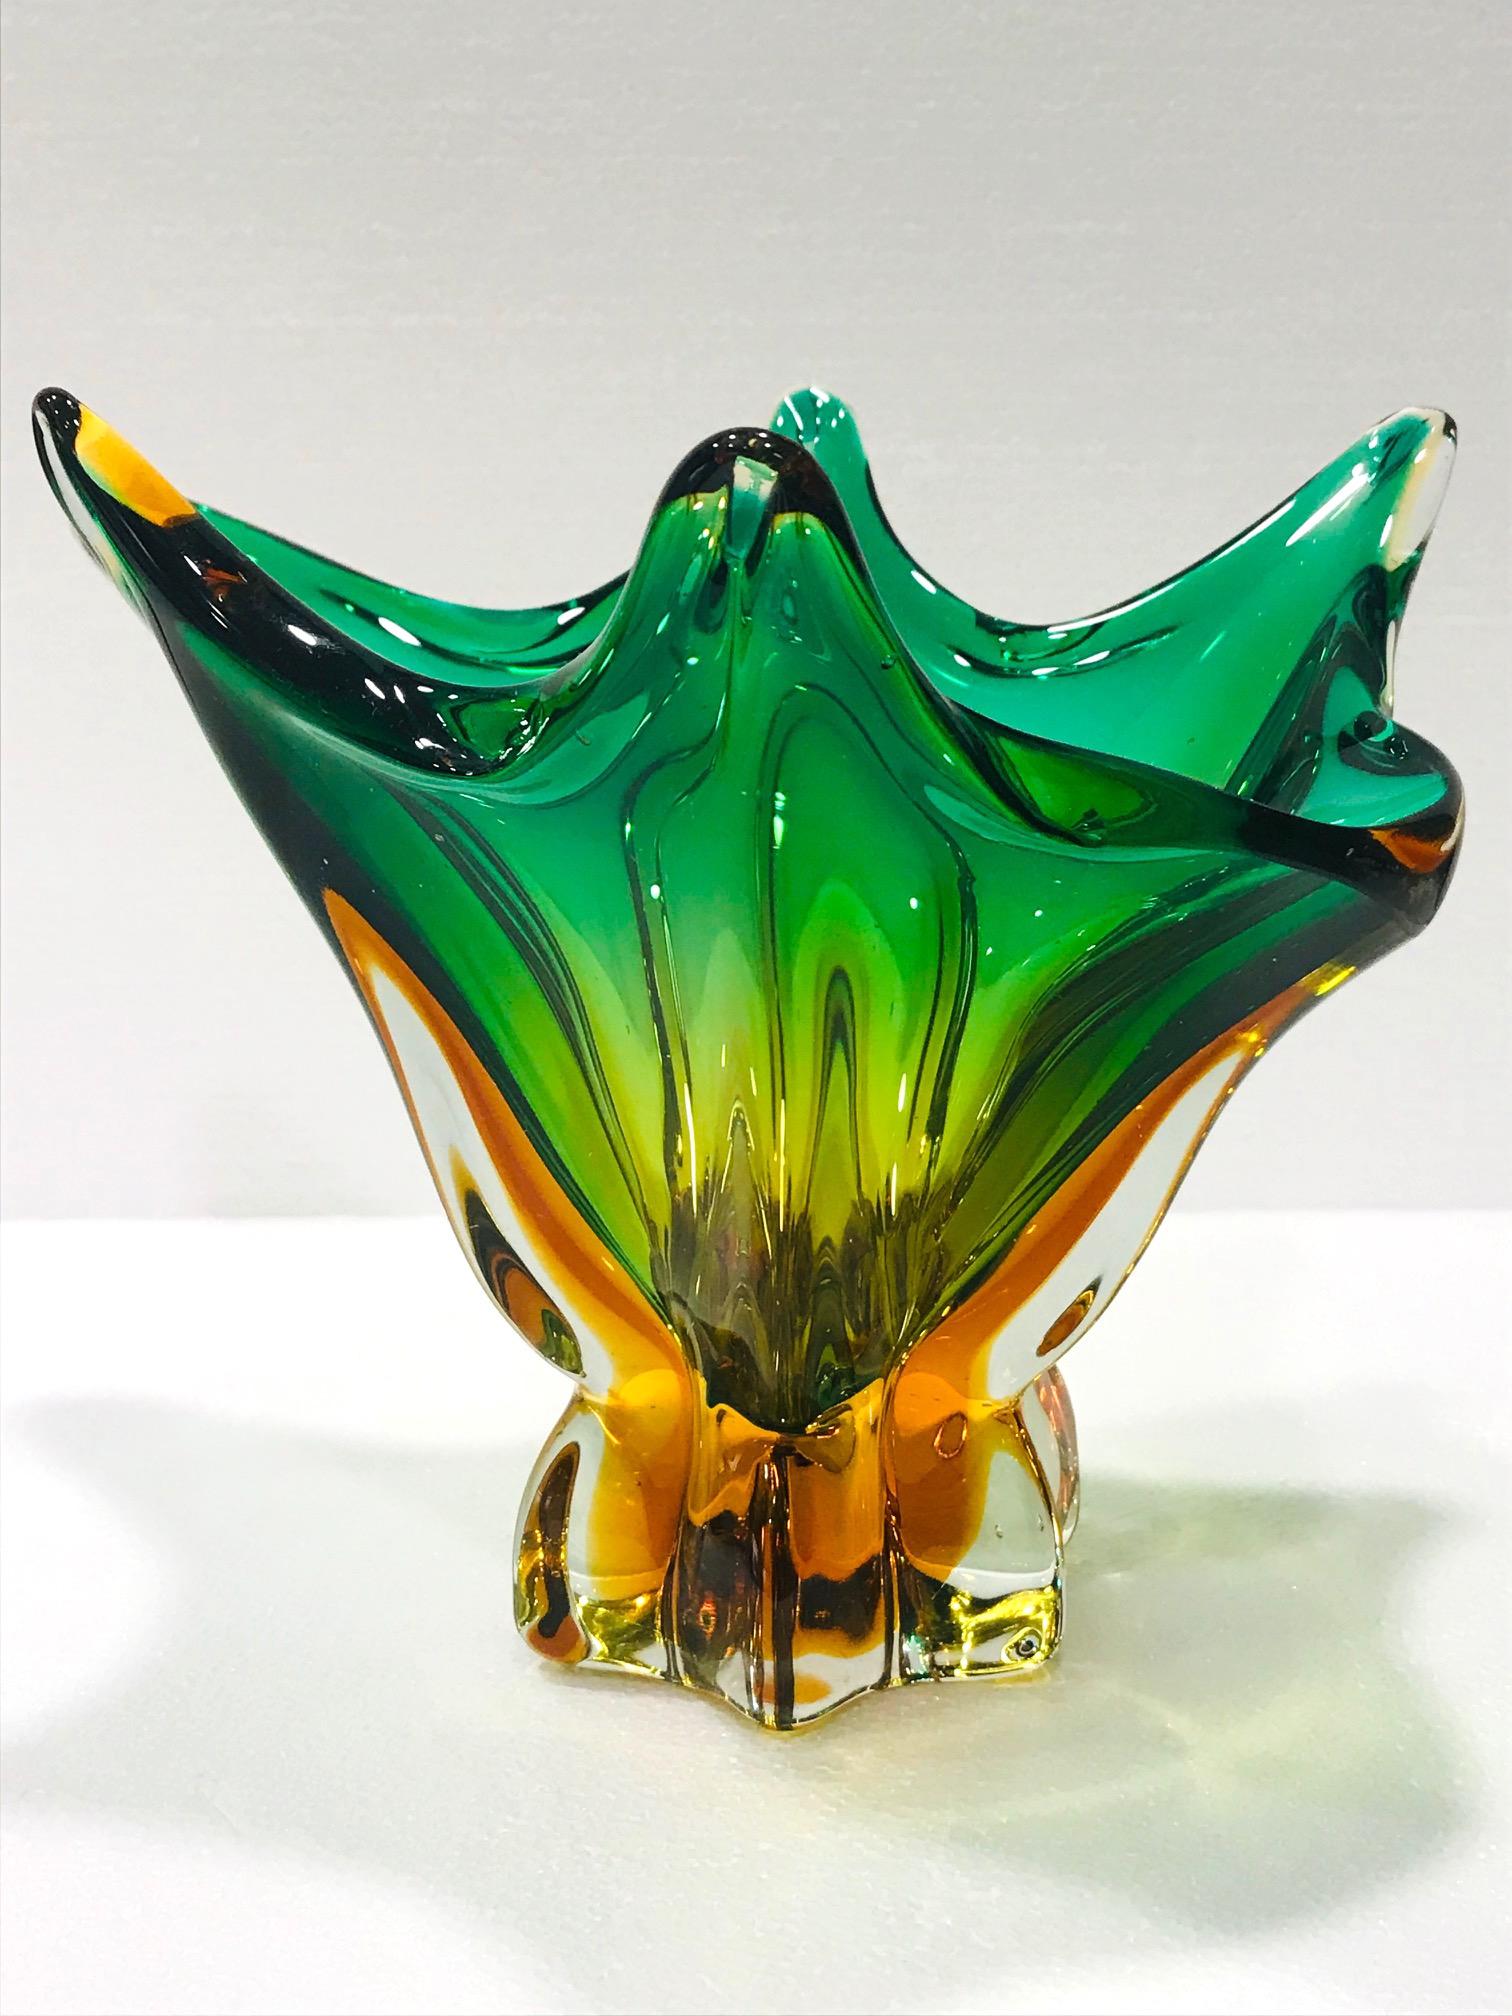 Hand-Crafted Mid-Century Modern Abstract Murano Glass Vase in Green and Gold, Italy c. 1950s